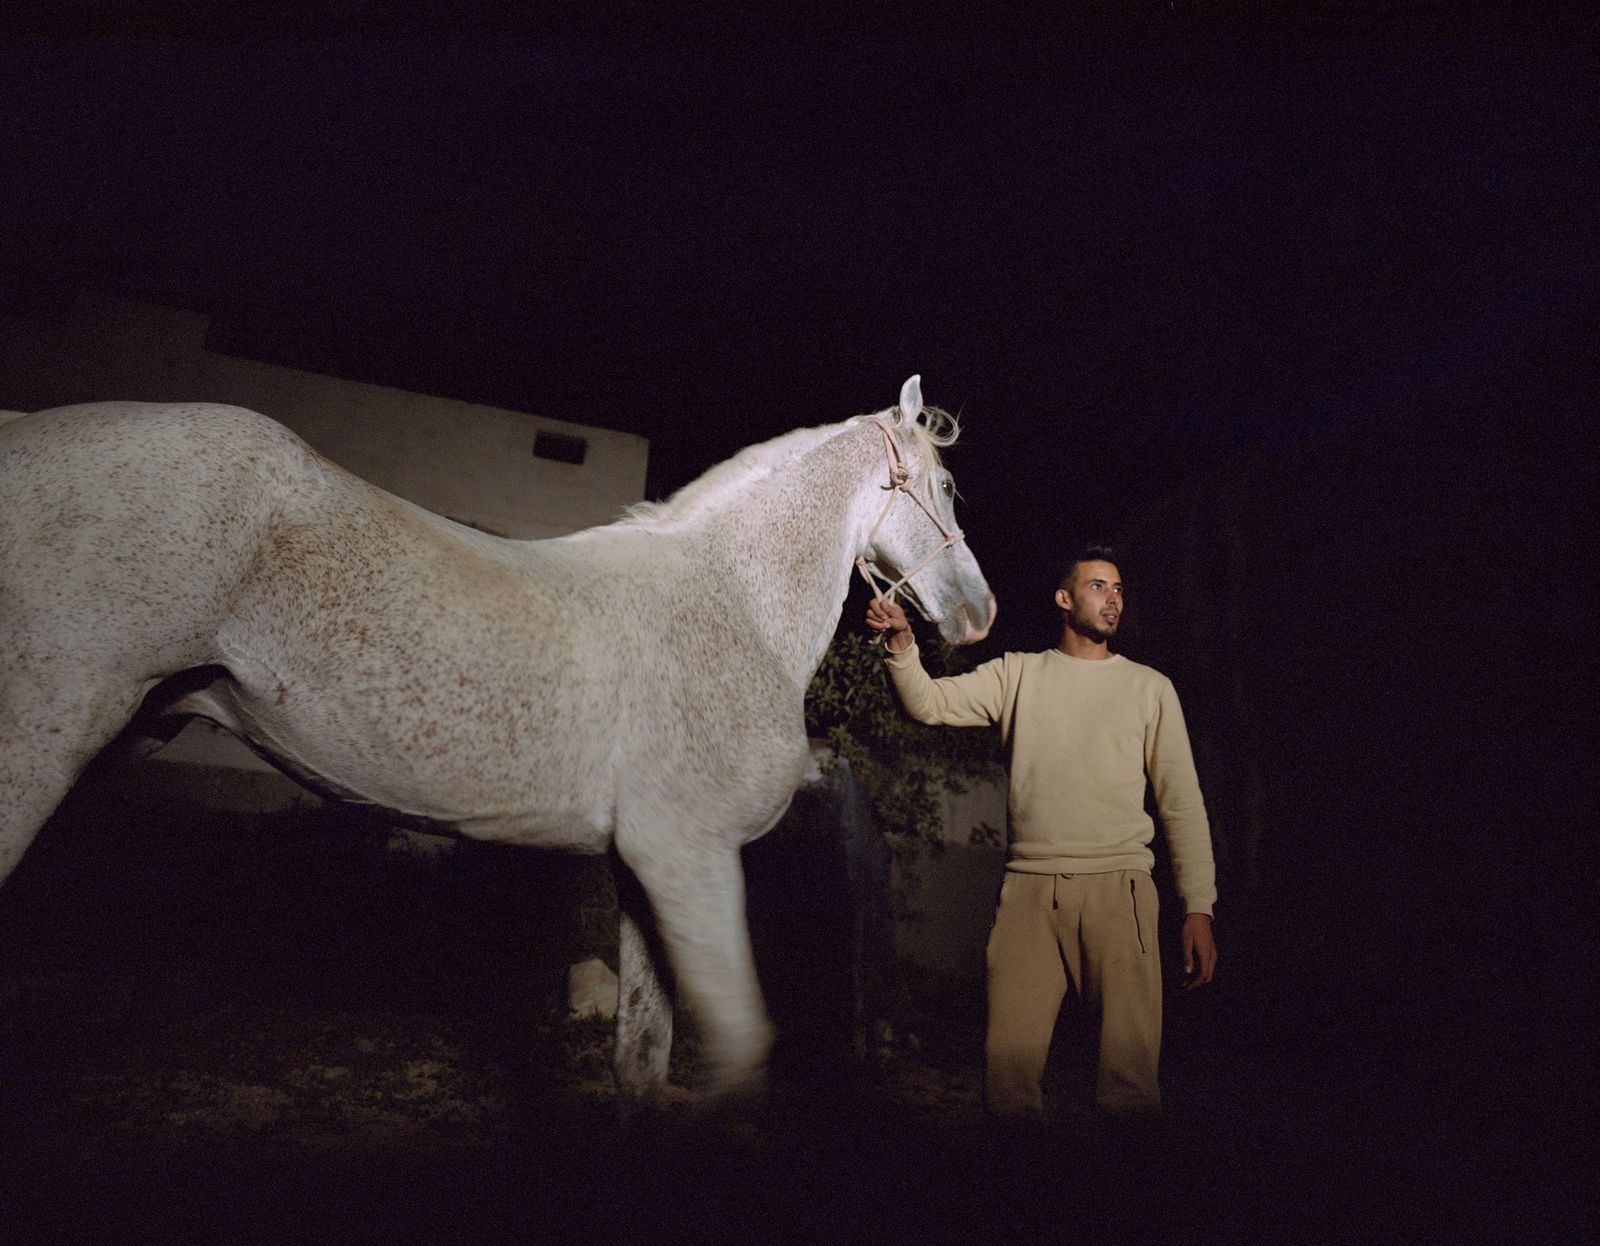 © Sophie Ebrard - Image from the They are not afraid of riding stallions photography project